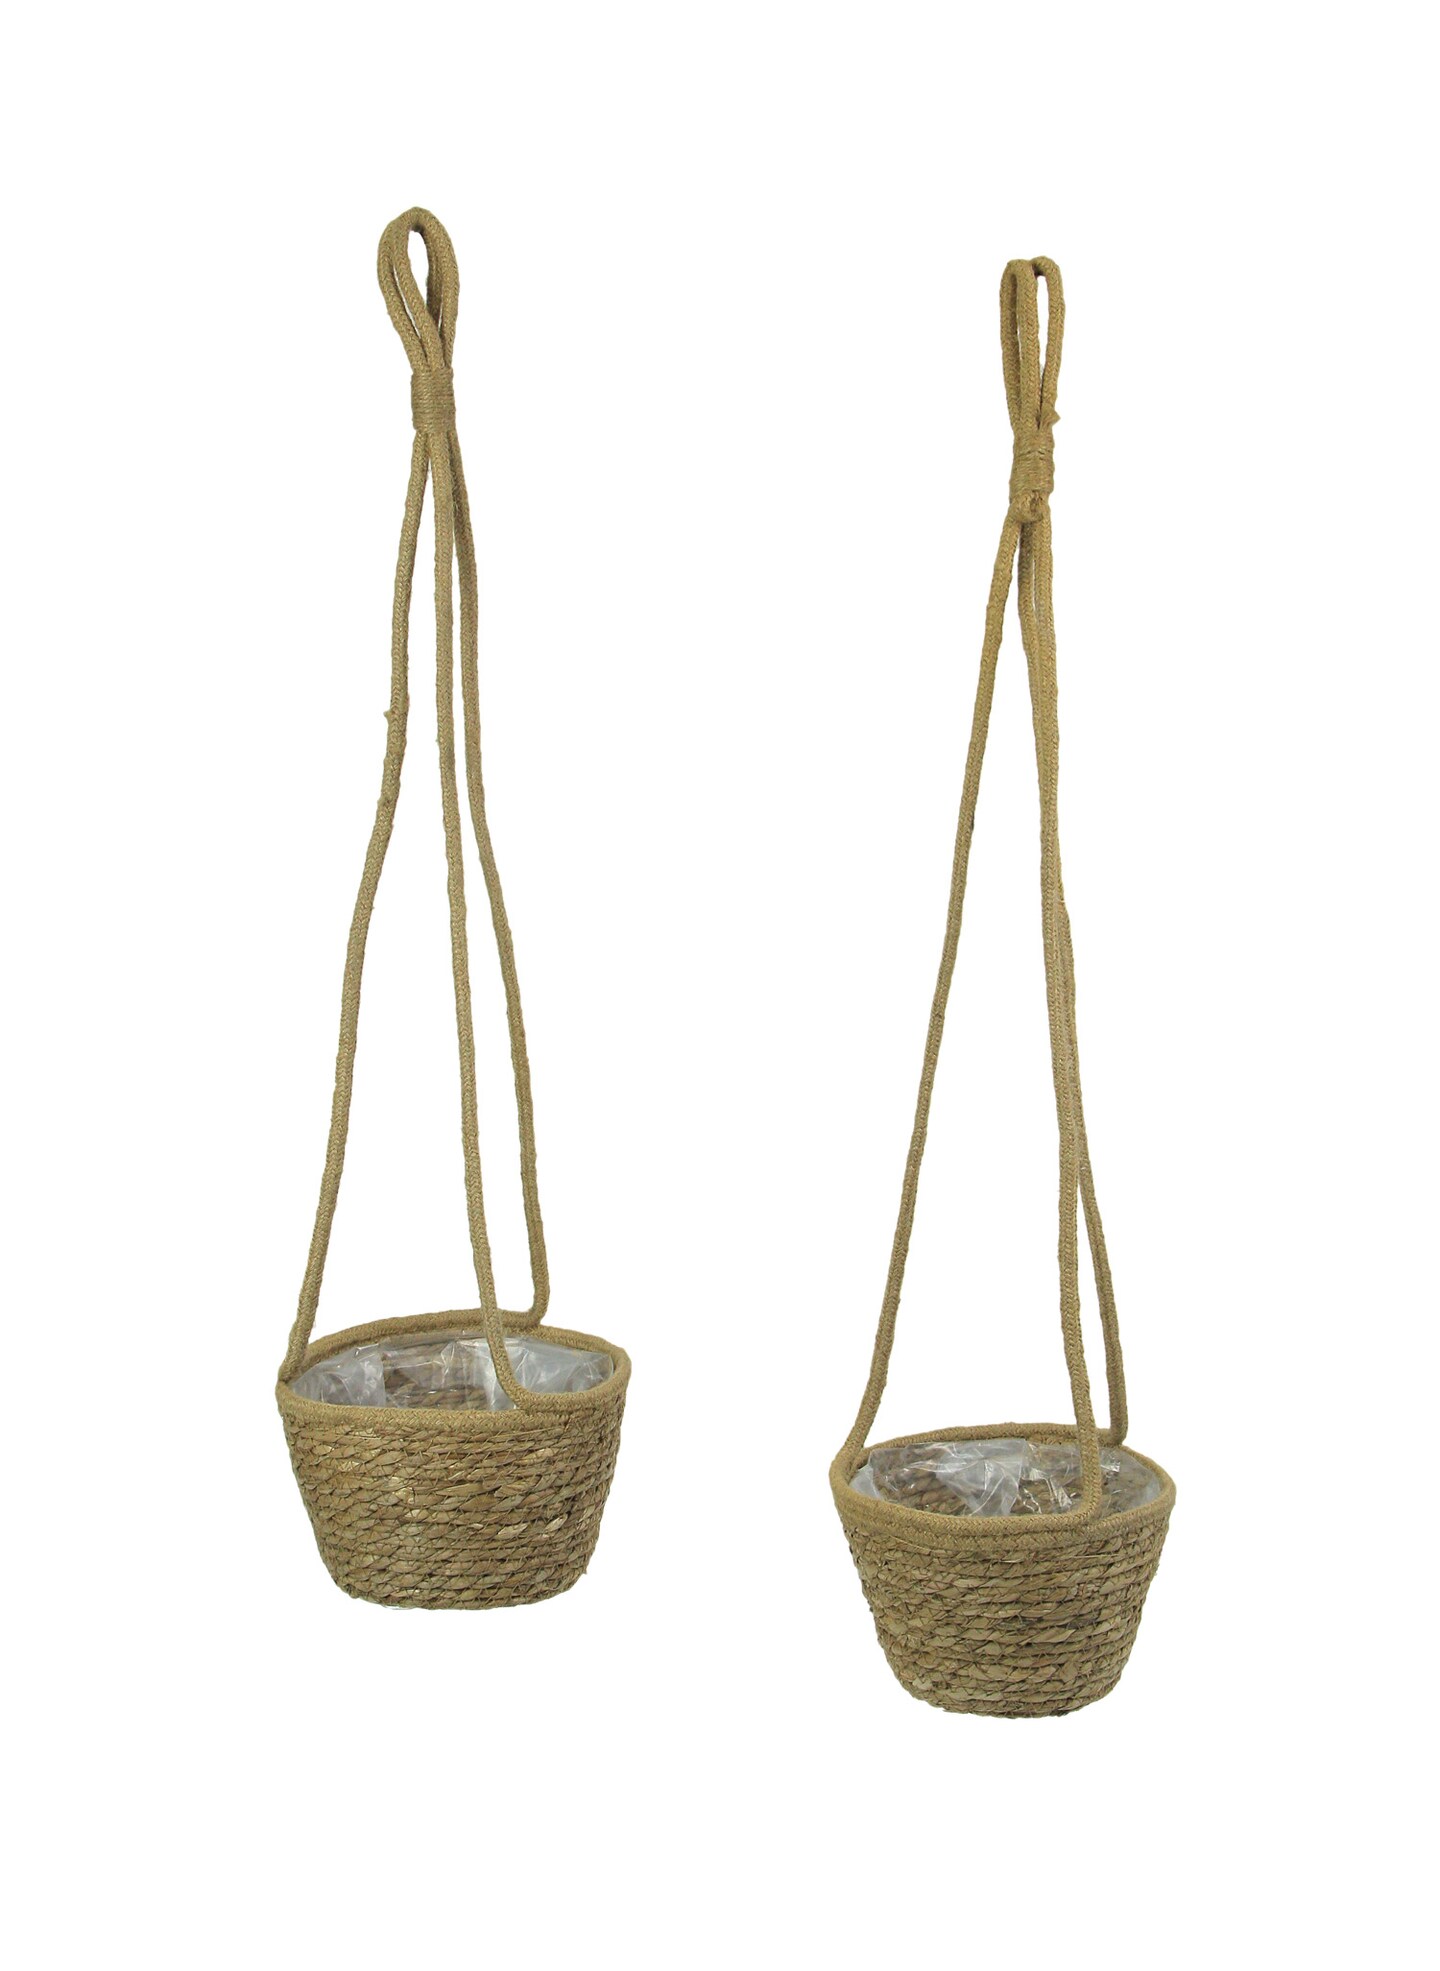 Set of 2 Woven Natural Jute Rope Hanging Planters With Clear Plastic Liners